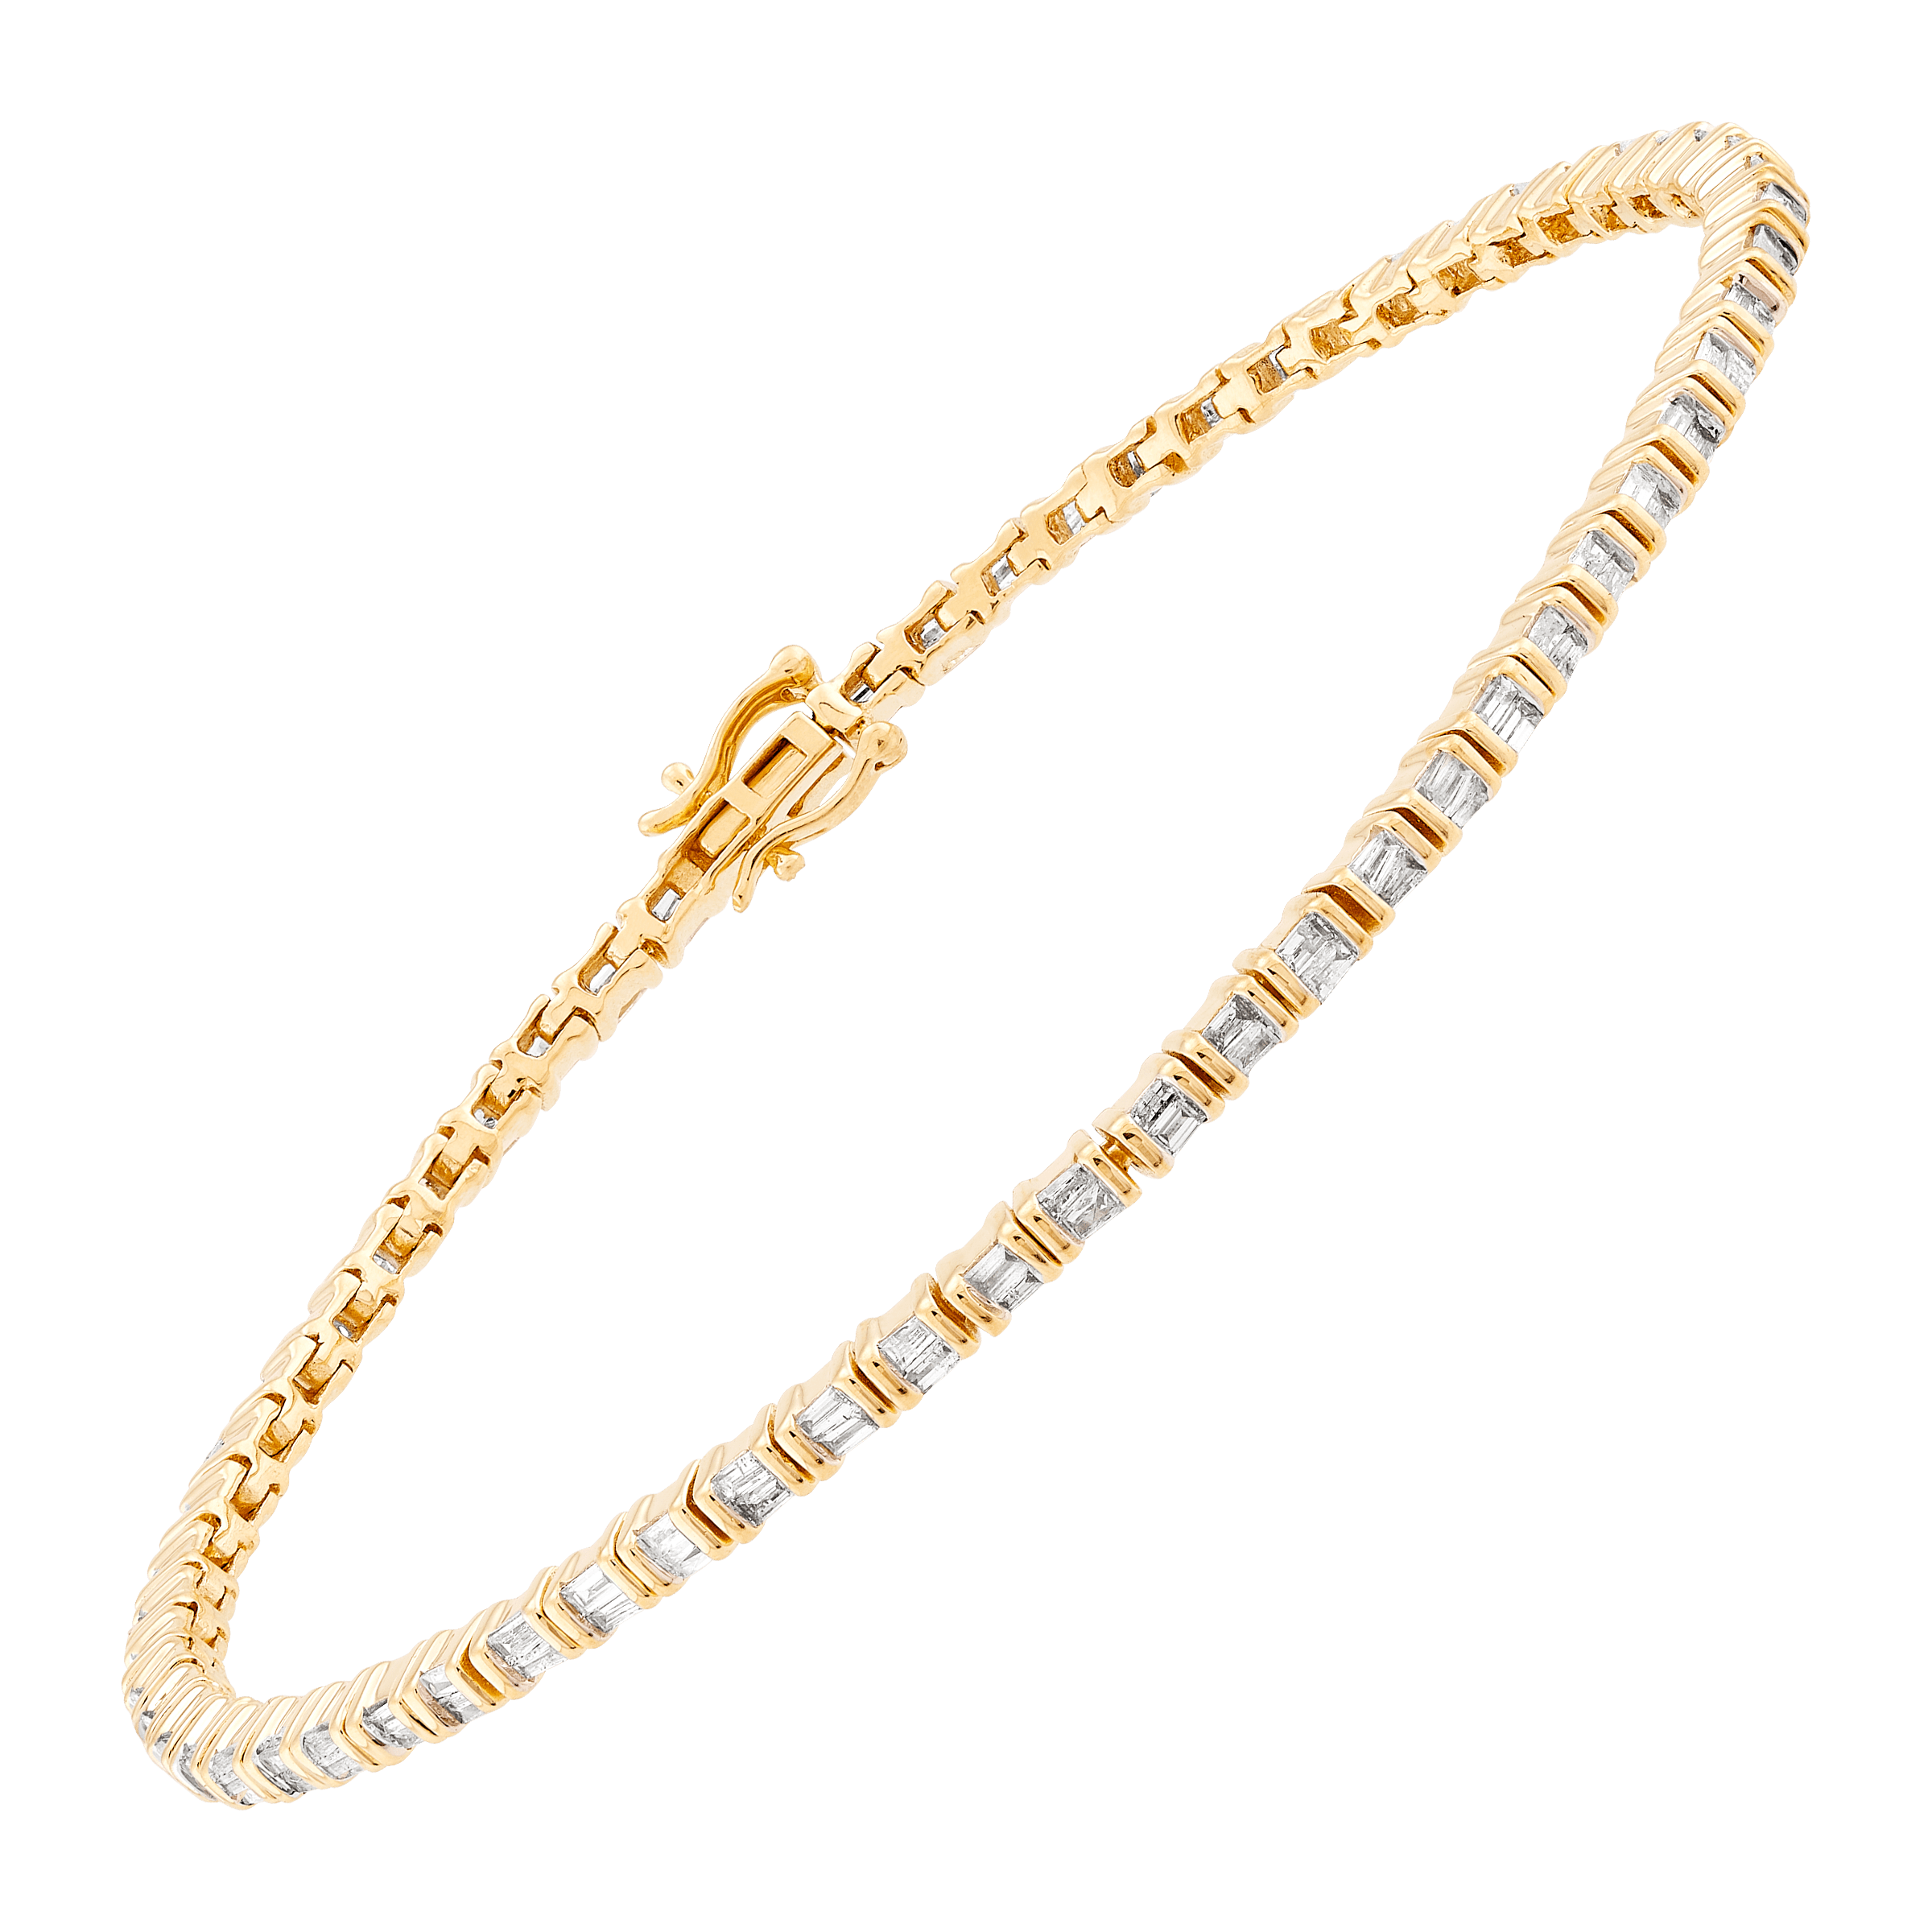 Pre-owned Welry 1 Cttw Diamond Tennis Bracelet In 10k Yellow Gold, 7" In White